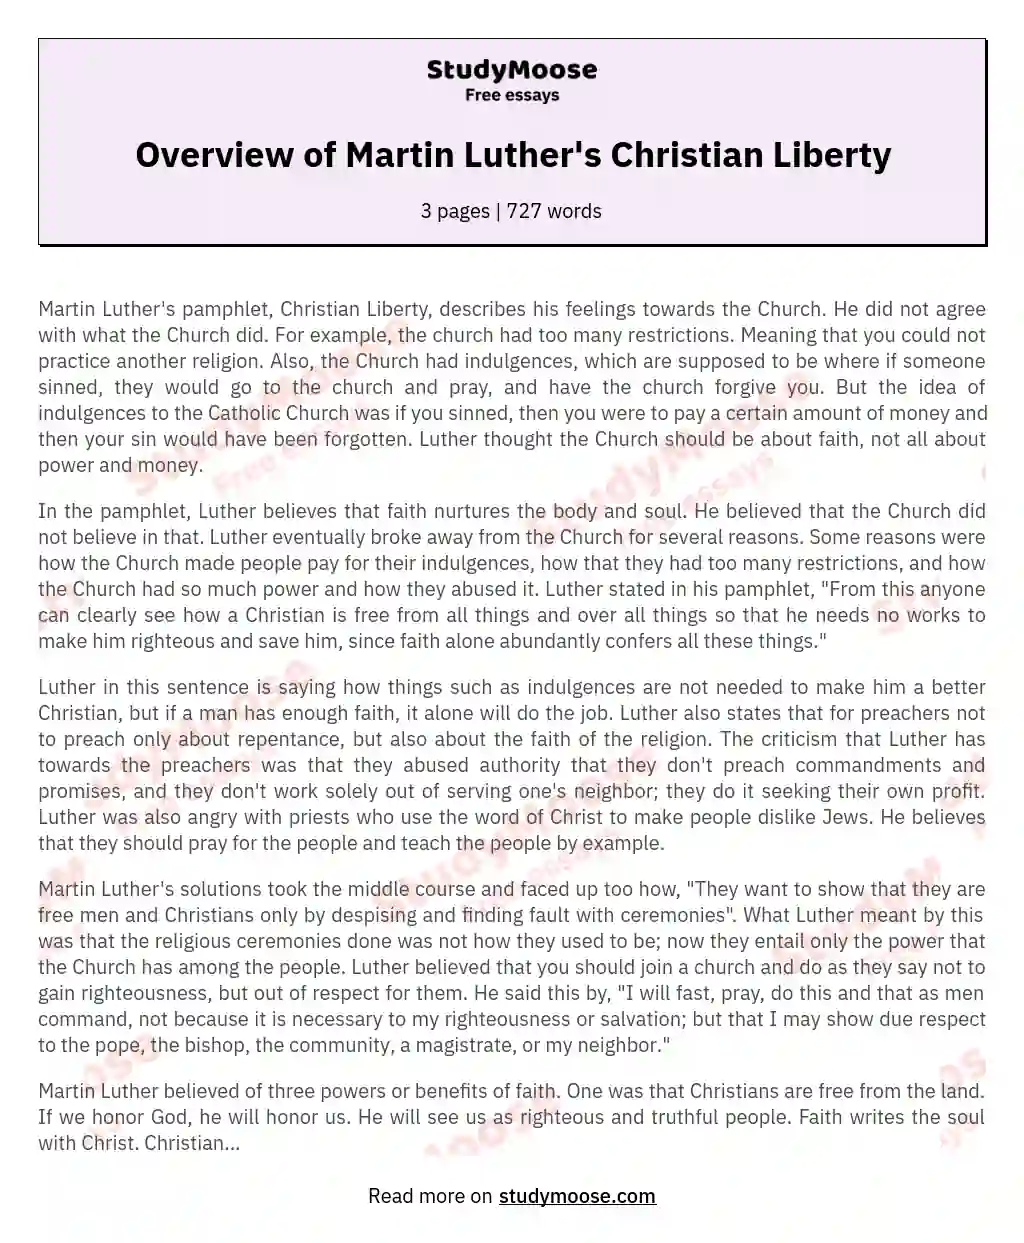 Overview of Martin Luther's Christian Liberty